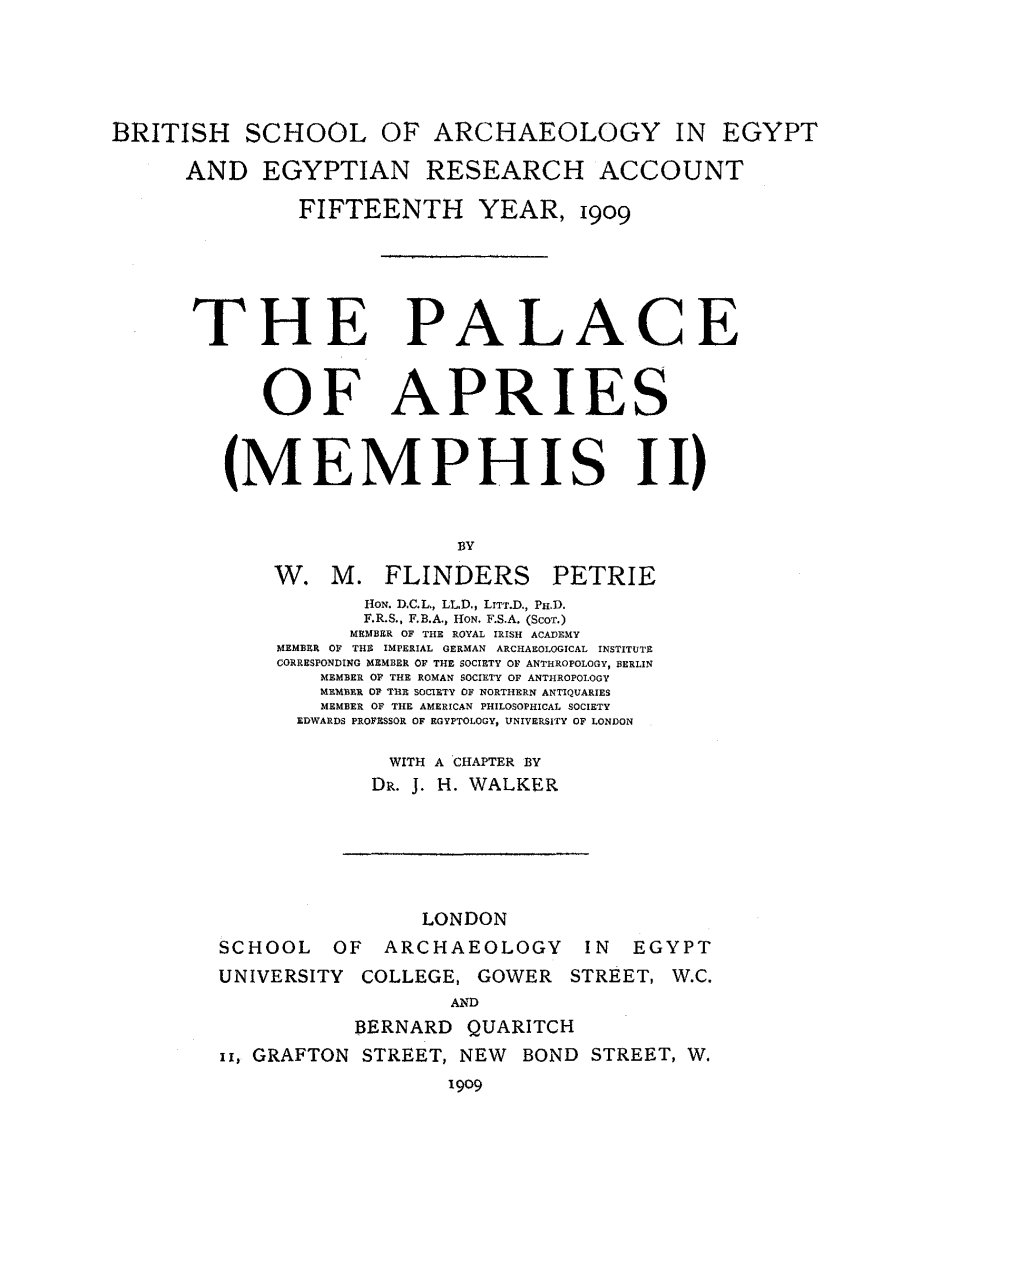 The Palace of Apries (Memphis 11)